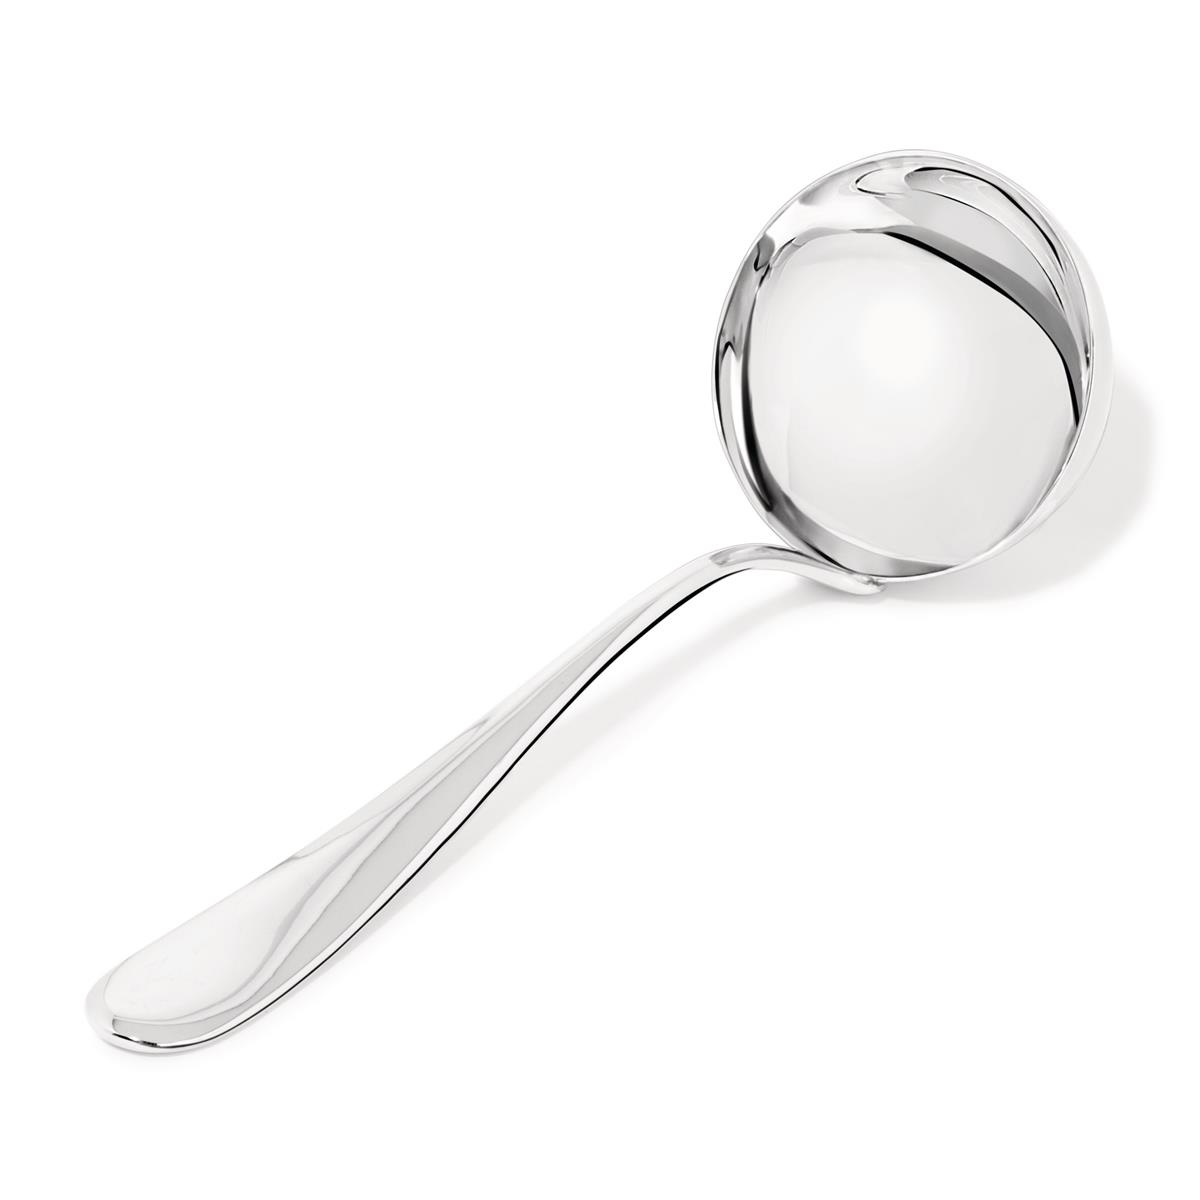 Alessi-Nuovo Milano 18/10 stainless steel ladle